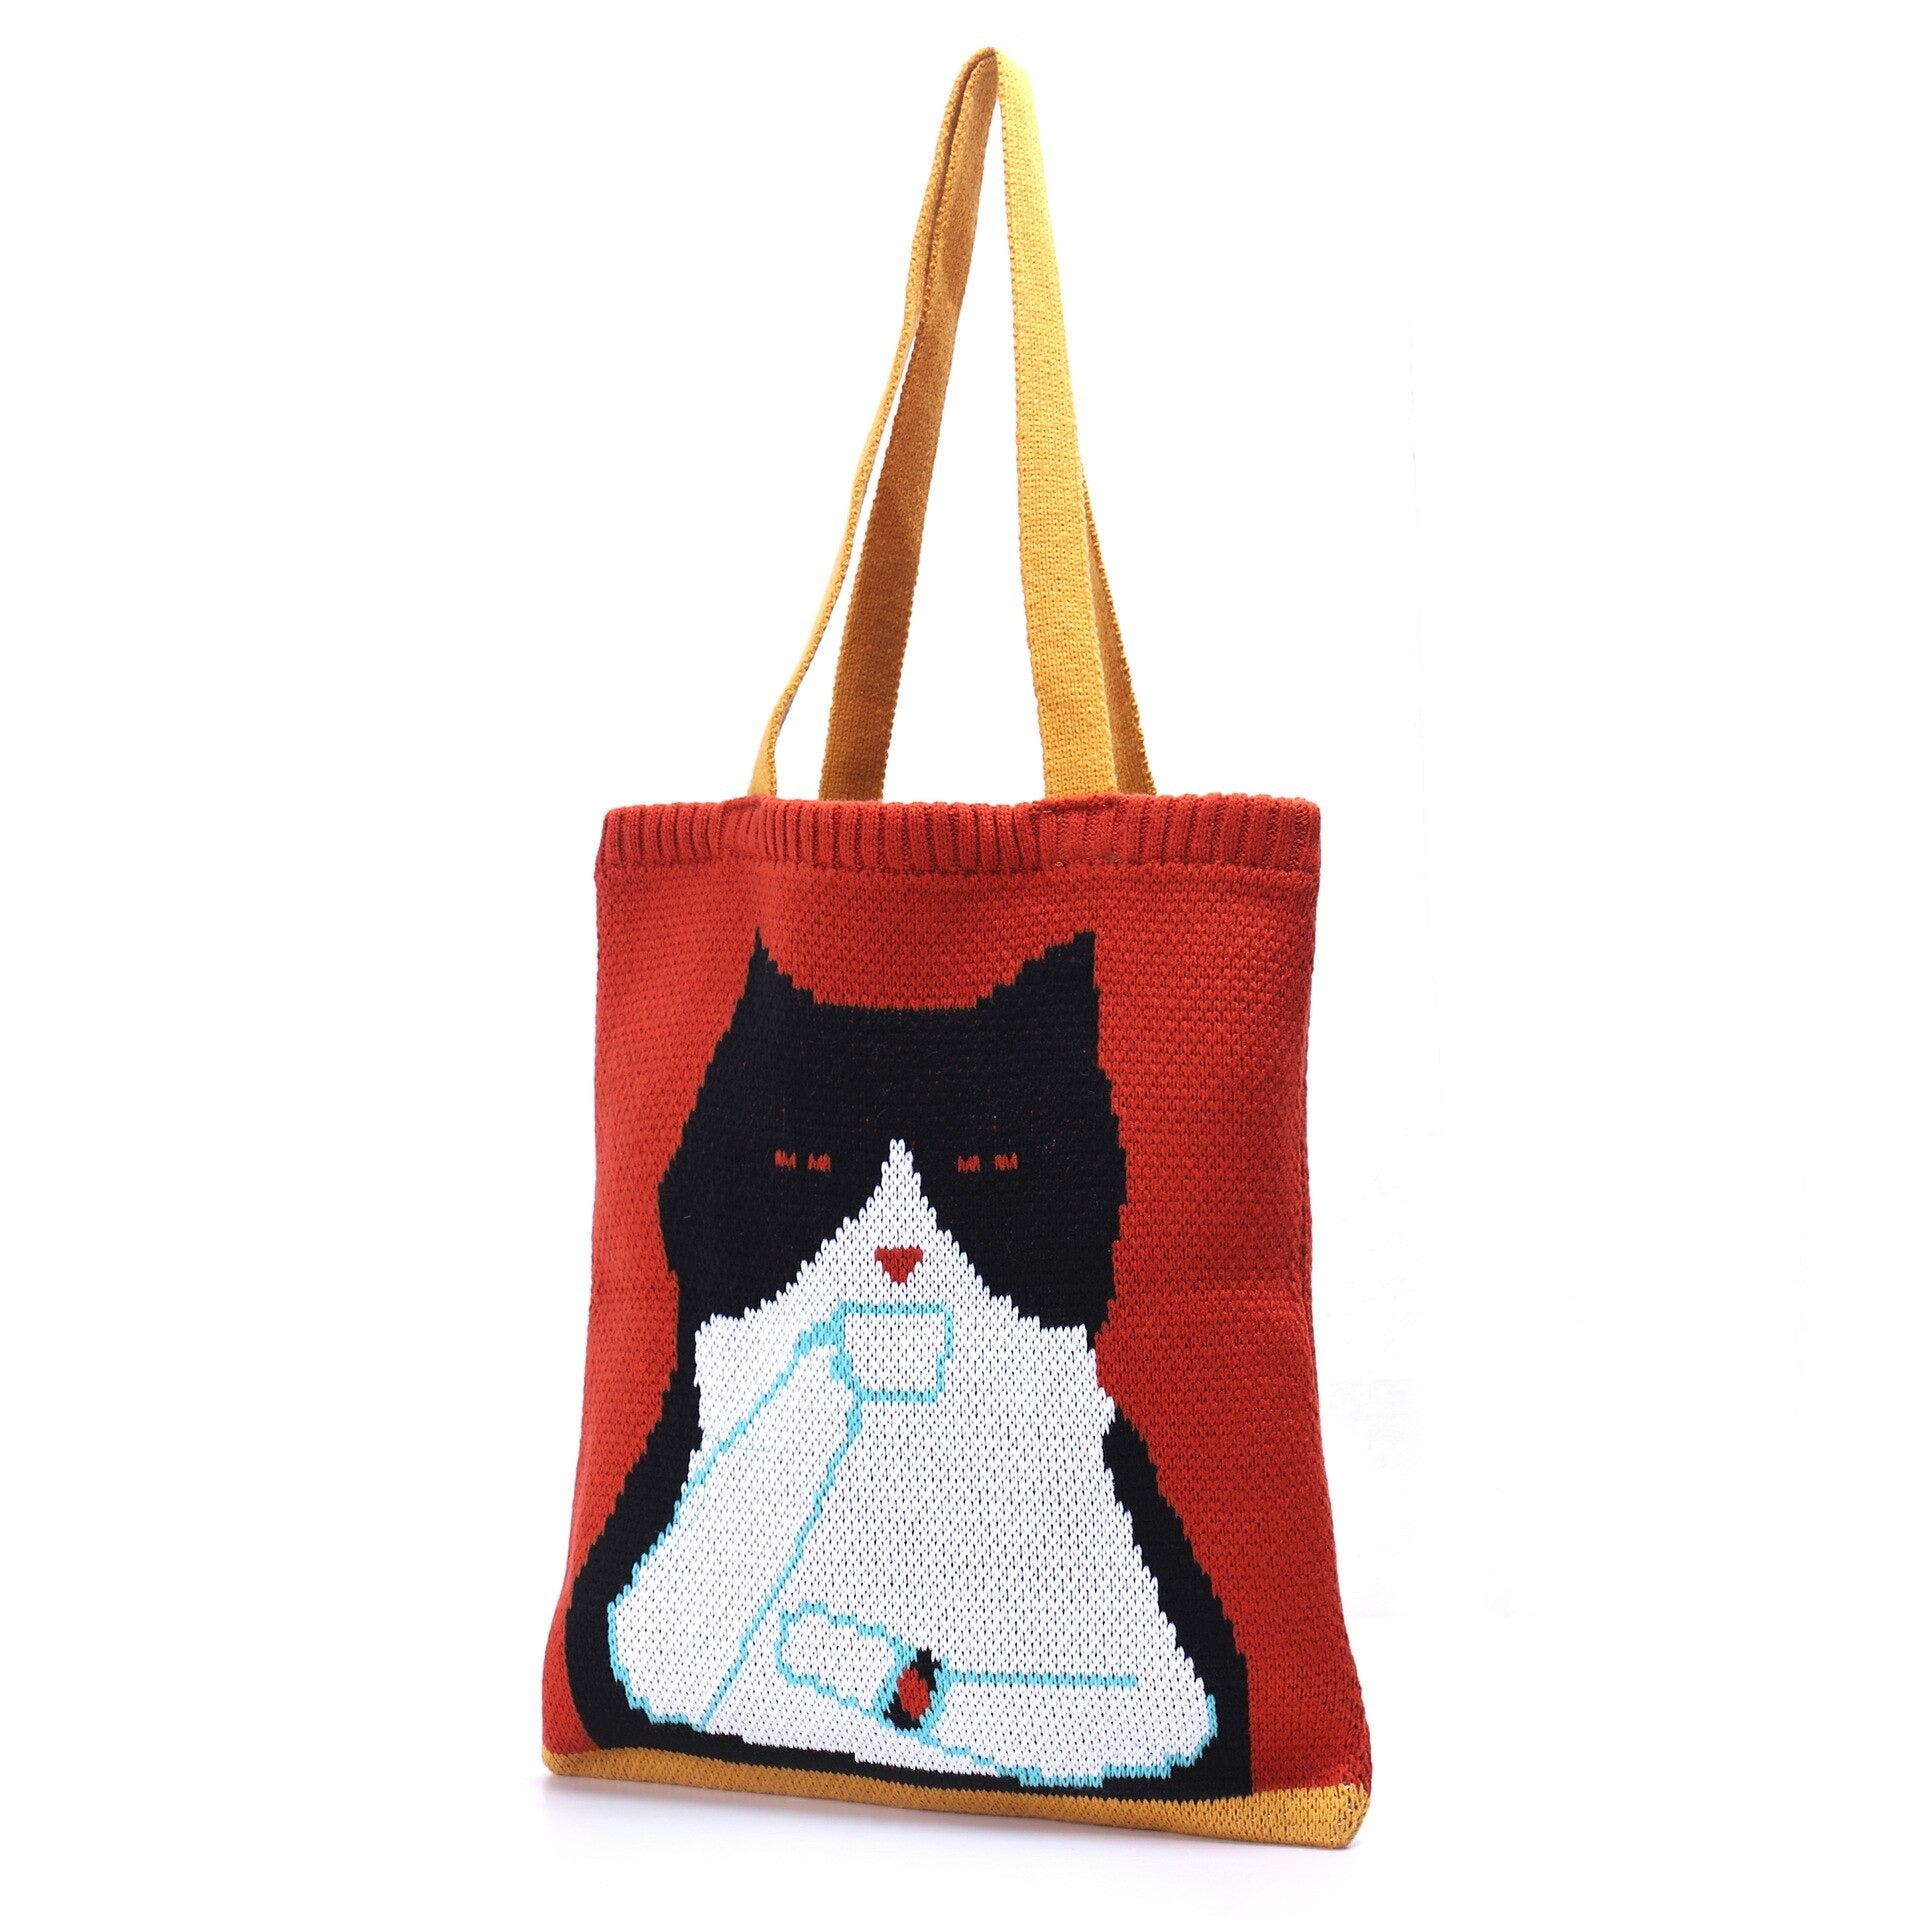 Cute Knitted Animal Tote Bag